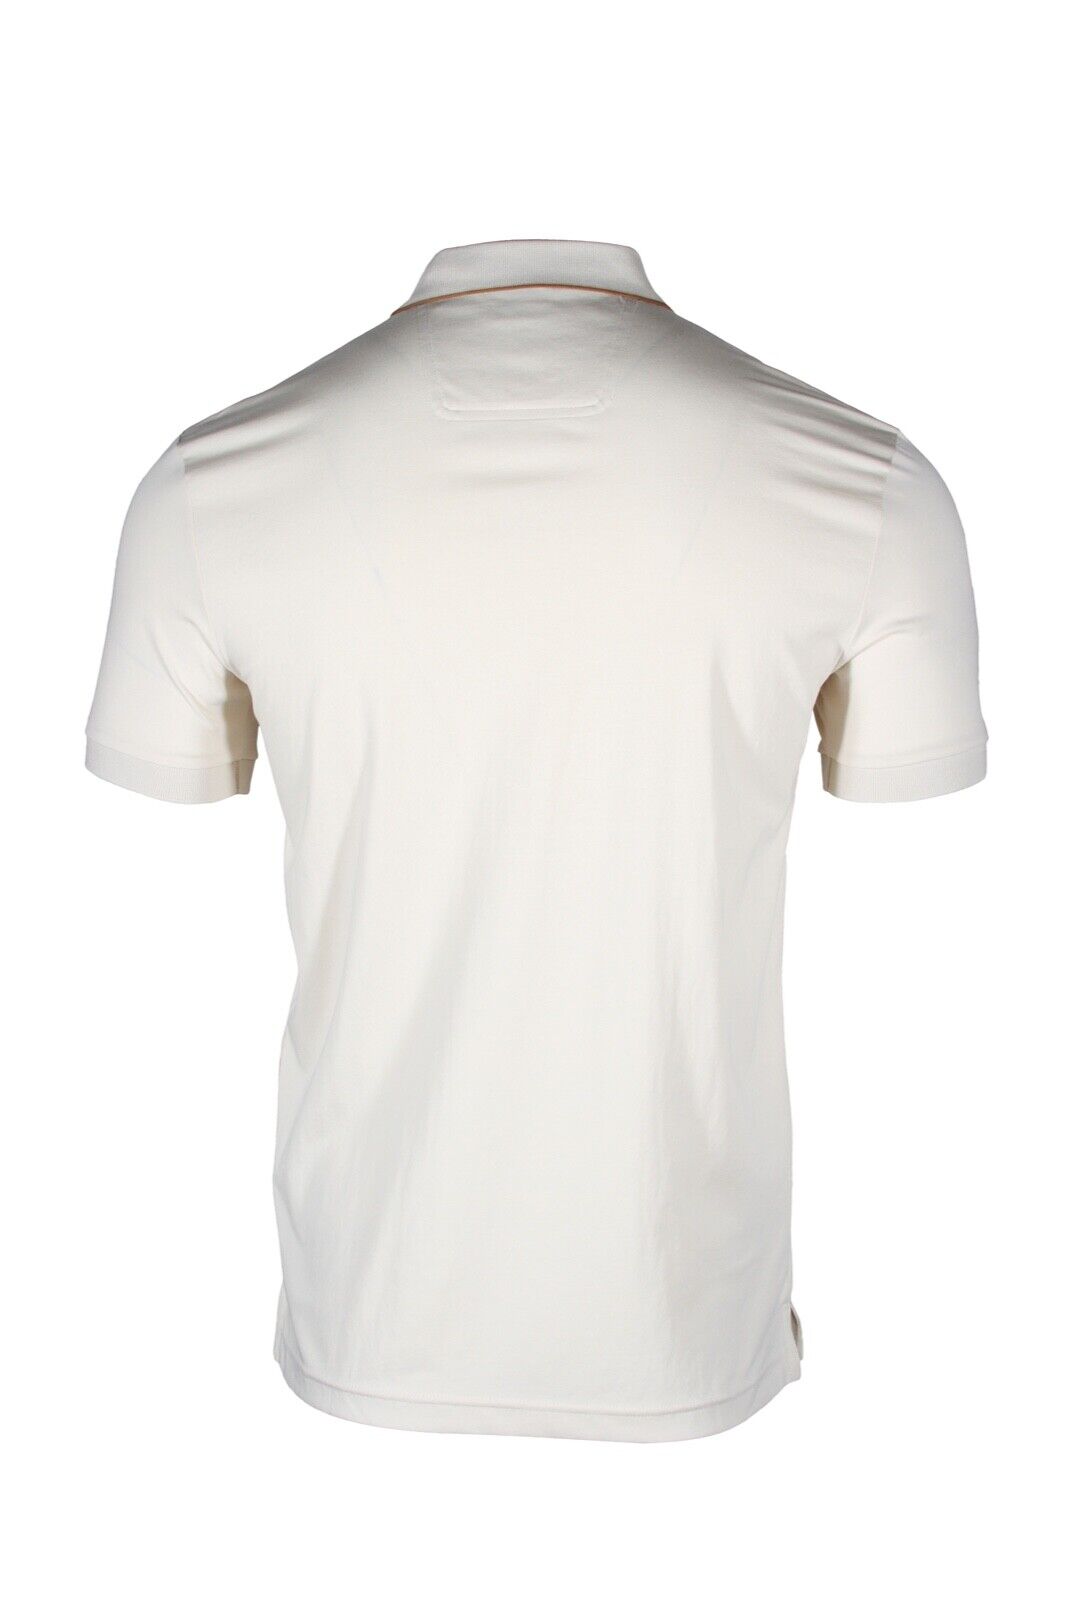 HUGO BOSS Pavel Men’s Polo Shirt with Multicolored Logo in White 50472135 131